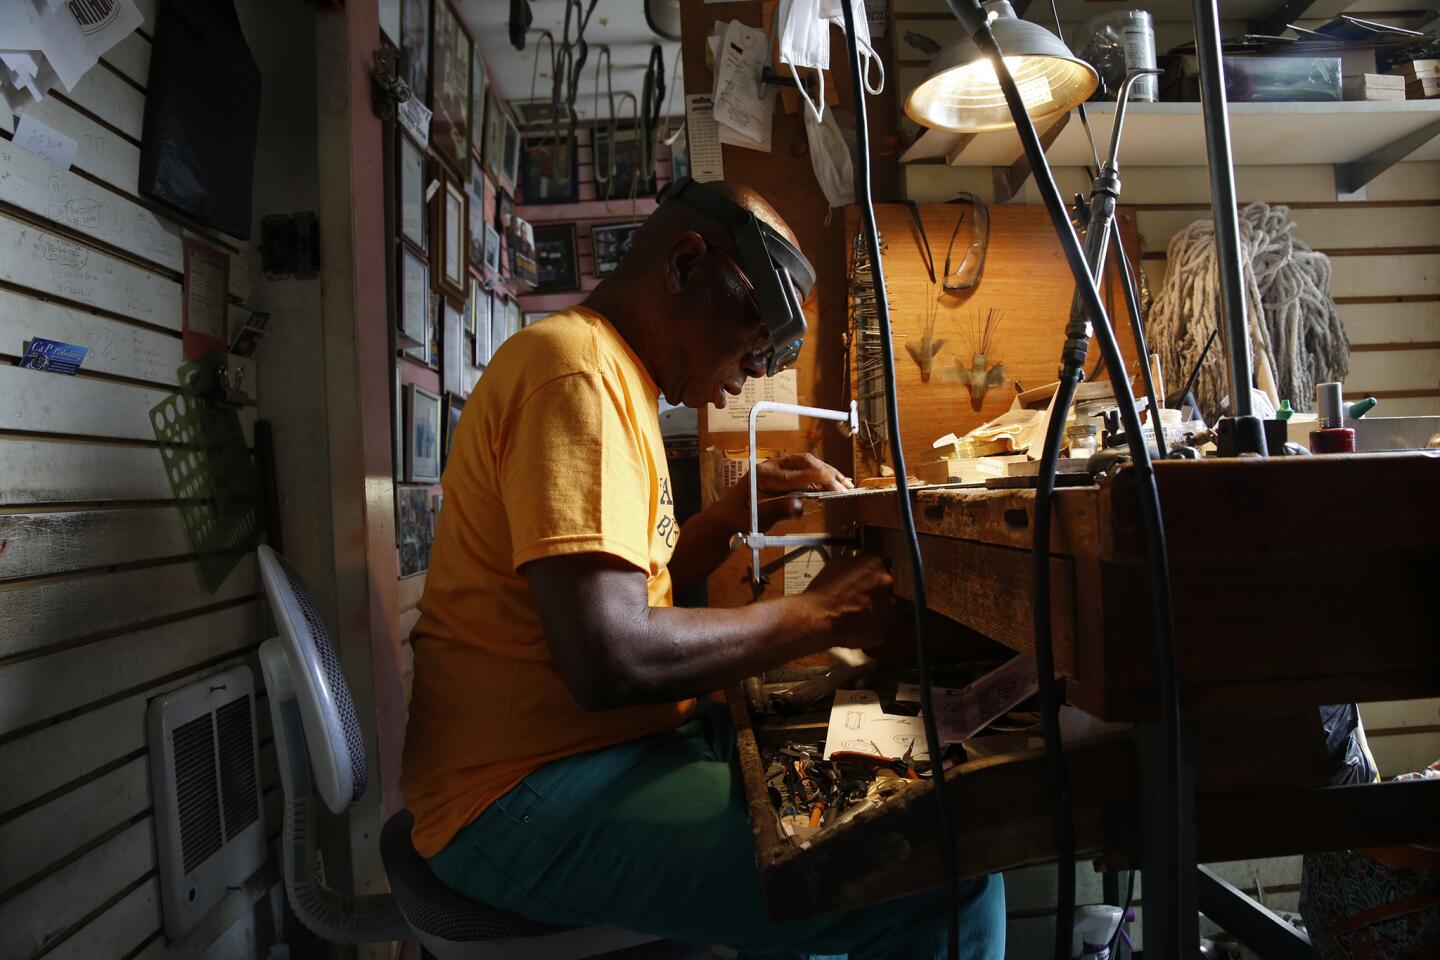 Earl Harley, 80, cuts metal into the shape of Africa. He makes buckles for the rich and famous from his tiny stall in Harlem, N.Y.